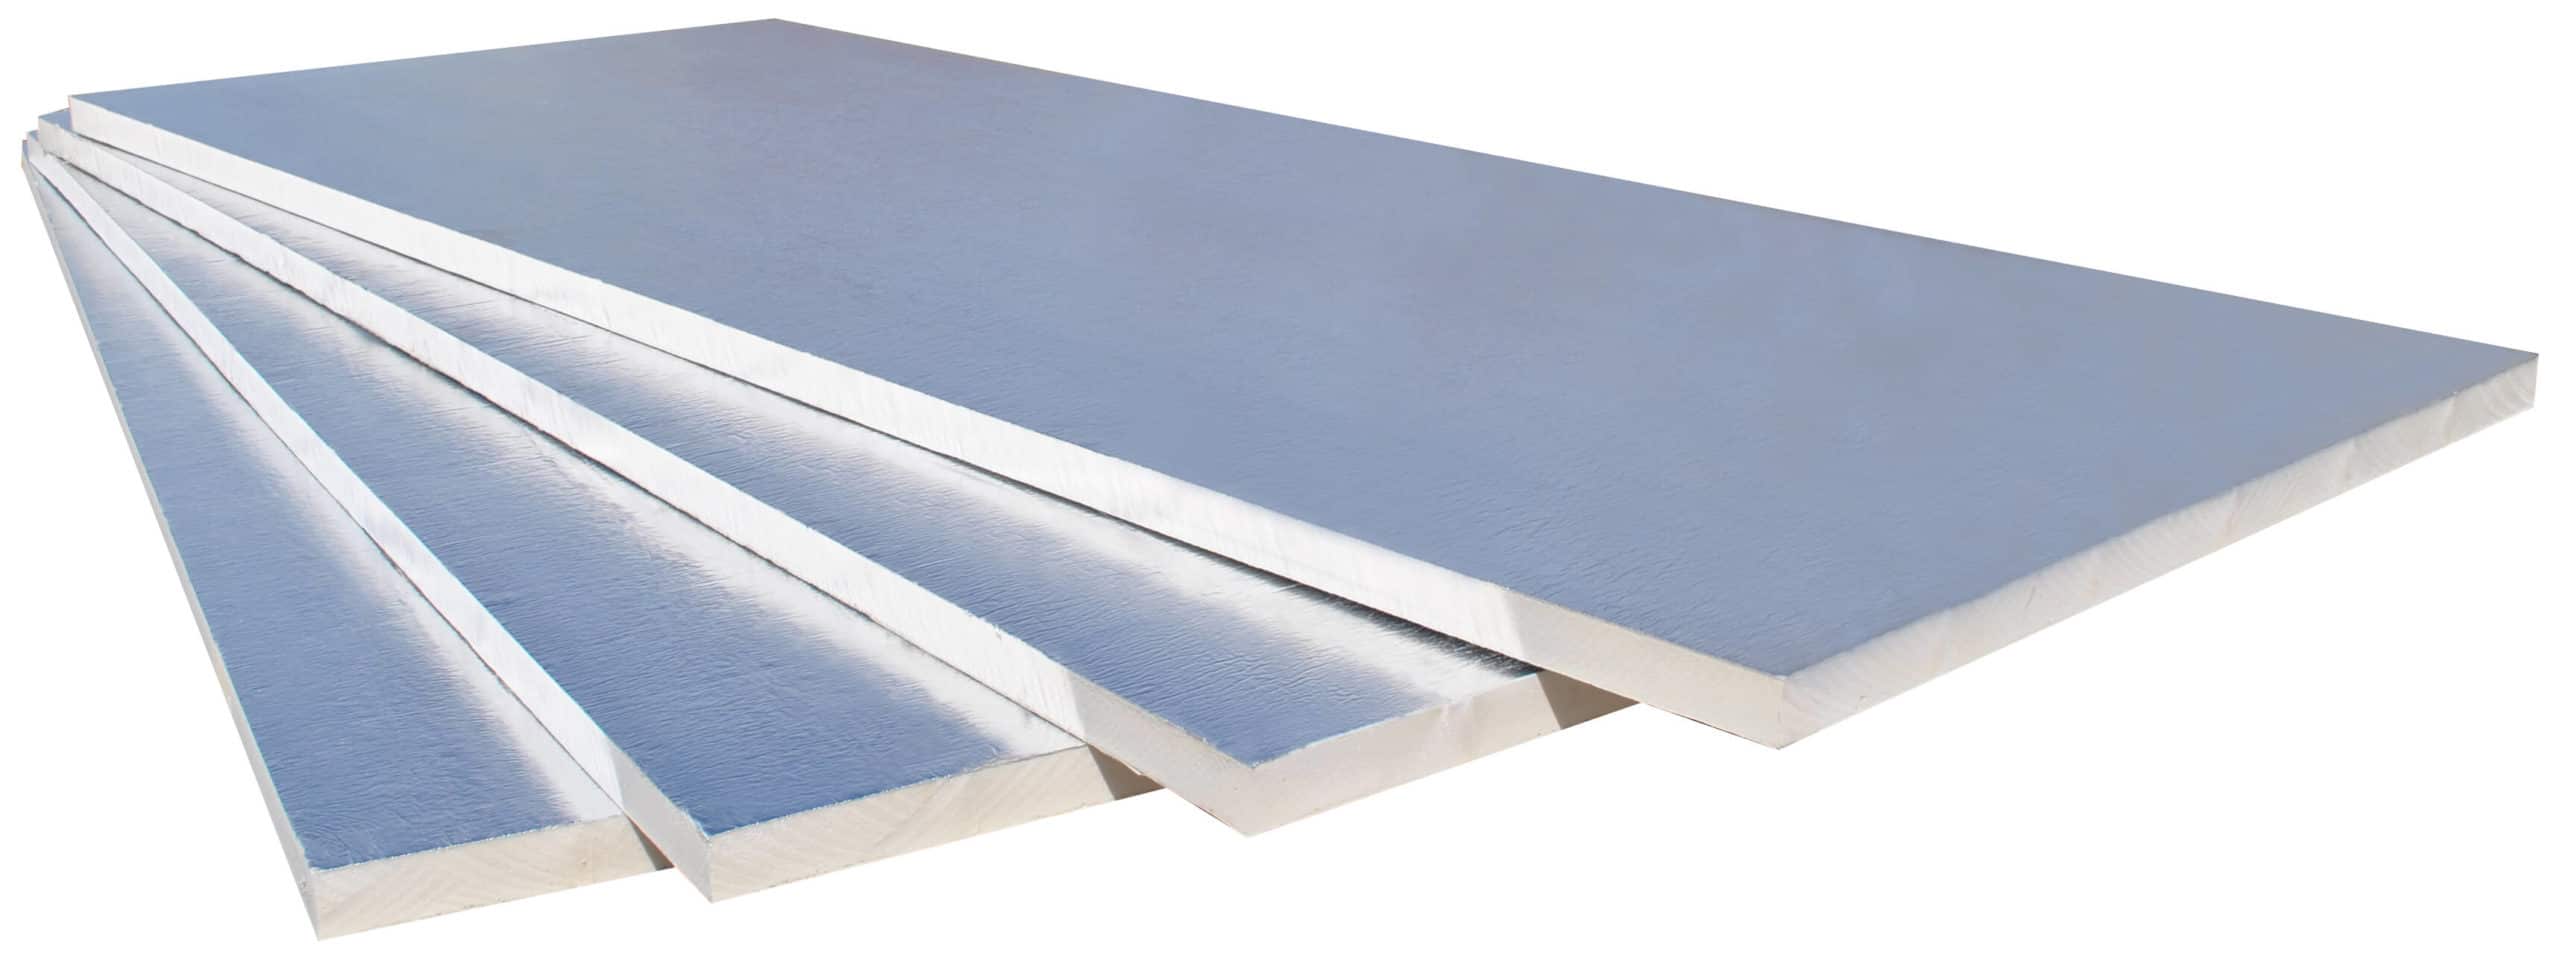 How To Foam Insulation Board | vlr.eng.br